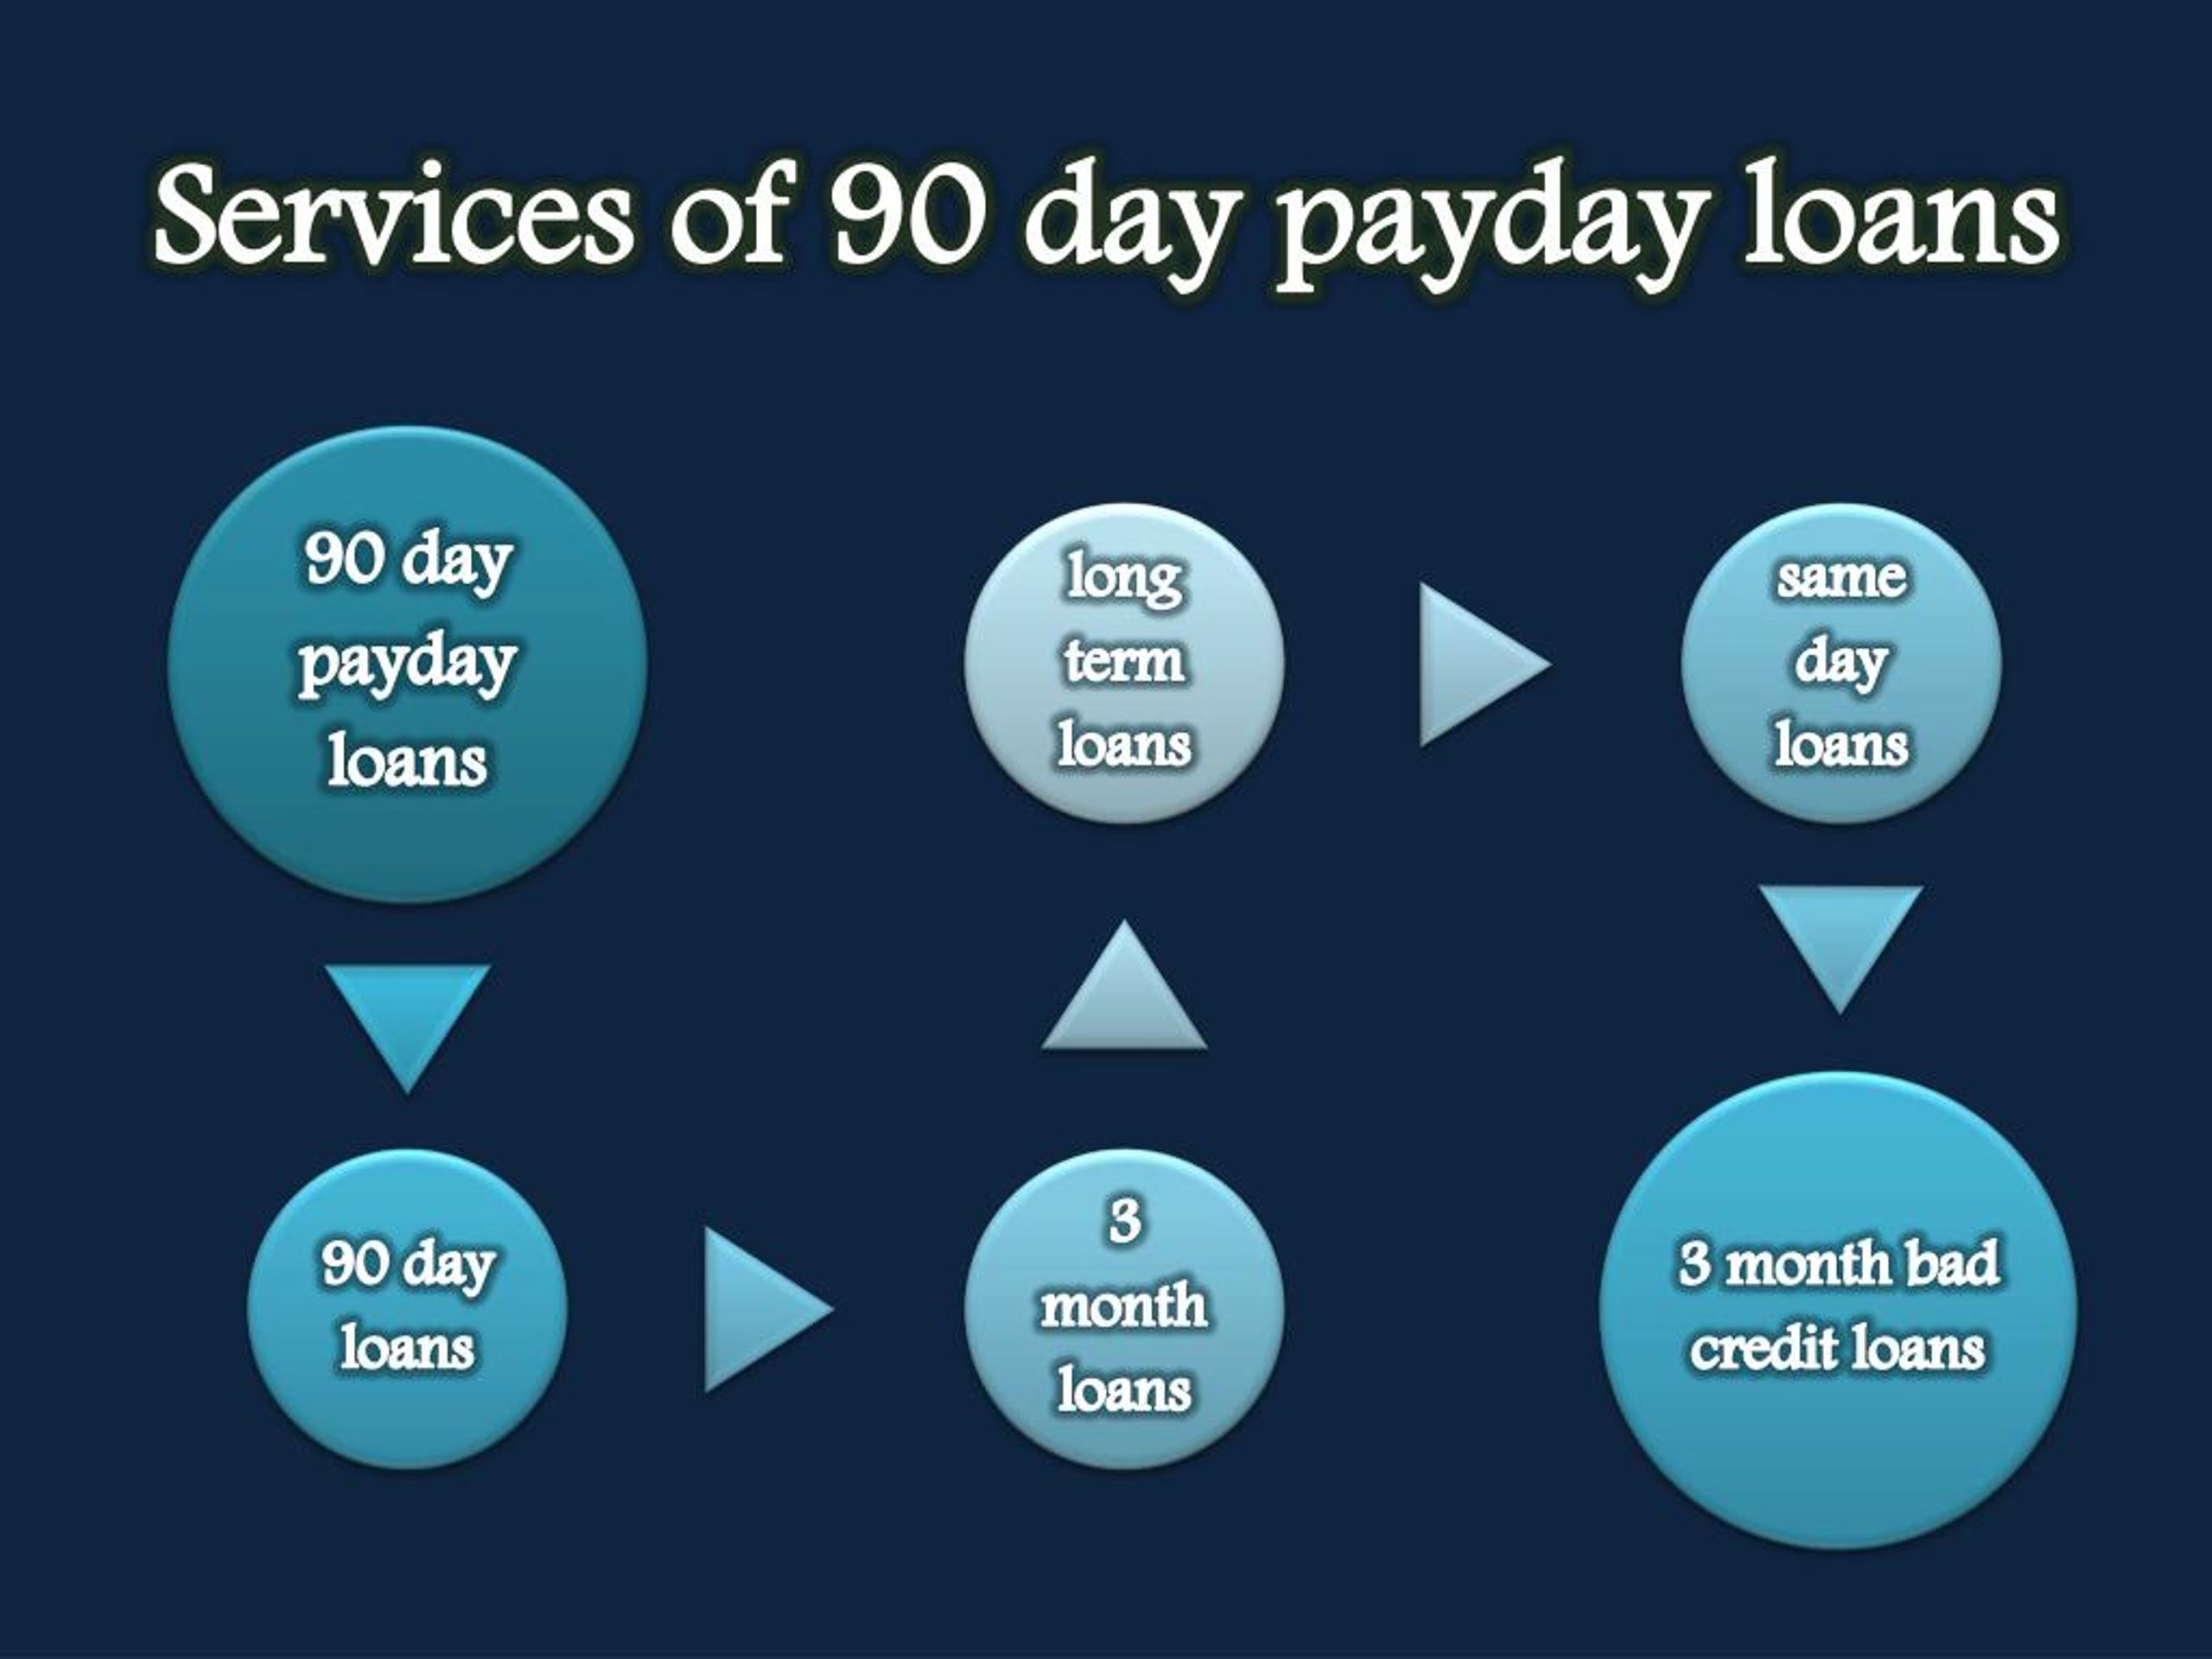 online payday loans Tennessee